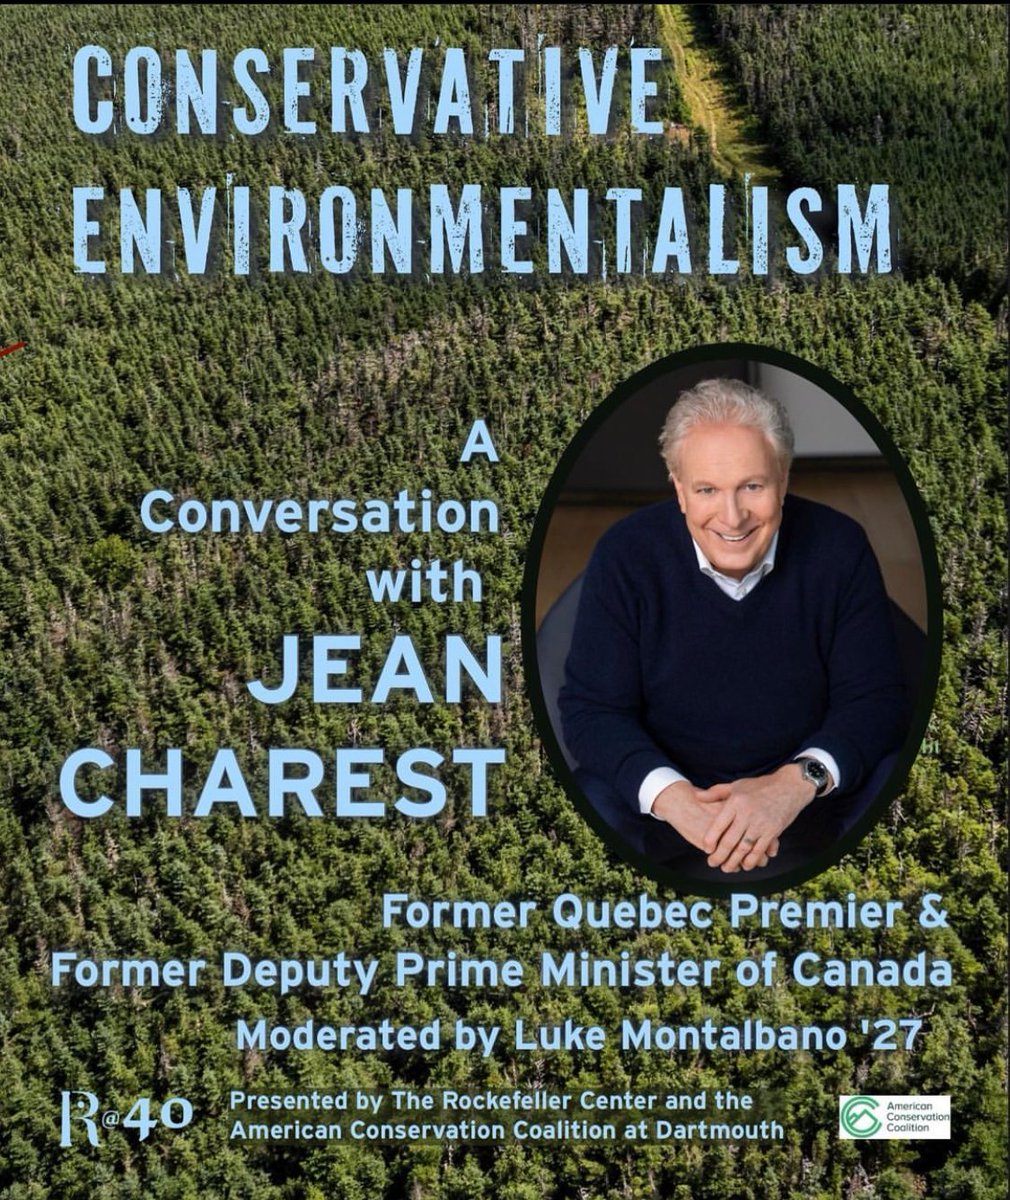 Join us for “Conservative Environmentalism: A Conversation with Jean Charest” Thursday, April 11th 5:00 - 6:00 PM Hinman Forum, Rockefeller Center #Dartmouth #DartmouthCollege #Dartmouth24s #Dartmouth25s #Dartmouth26s #Dartmouth27s